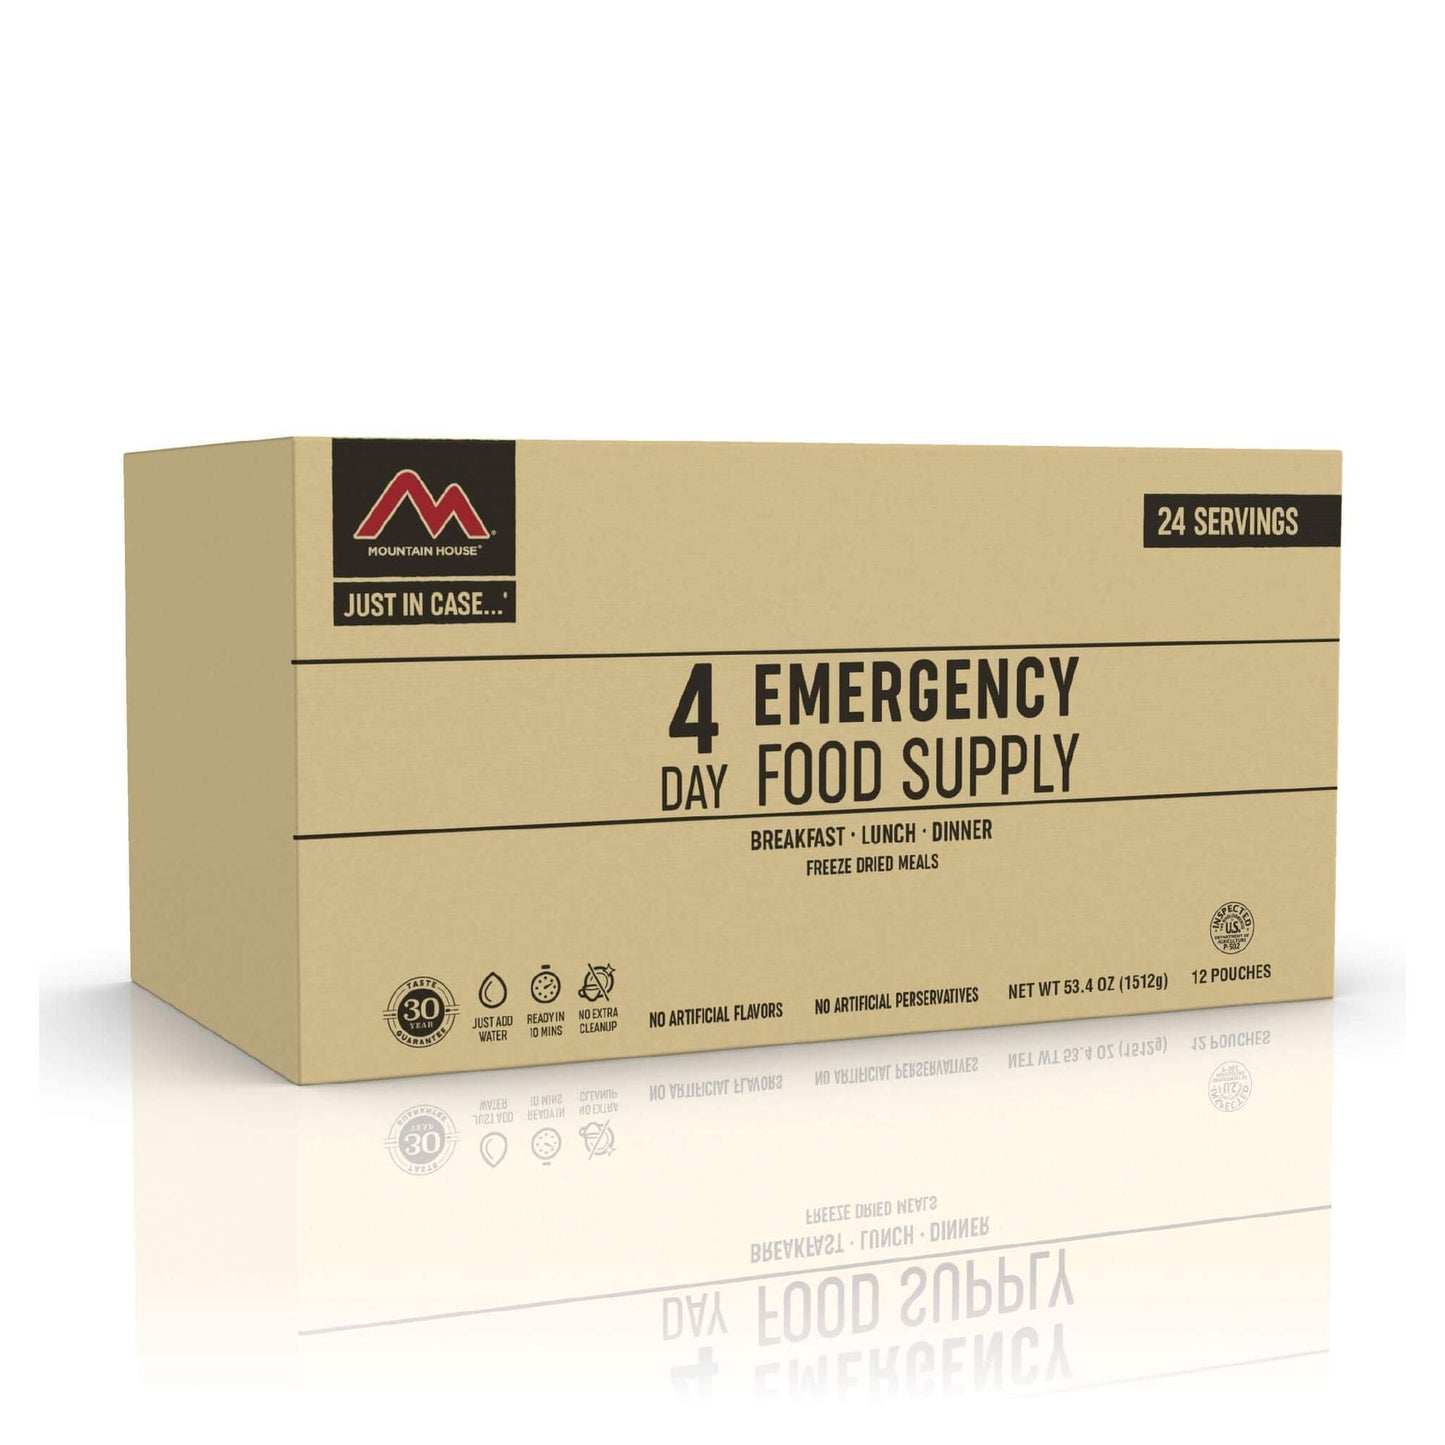 Just in Case...® 4 Day Emergency Food Supply